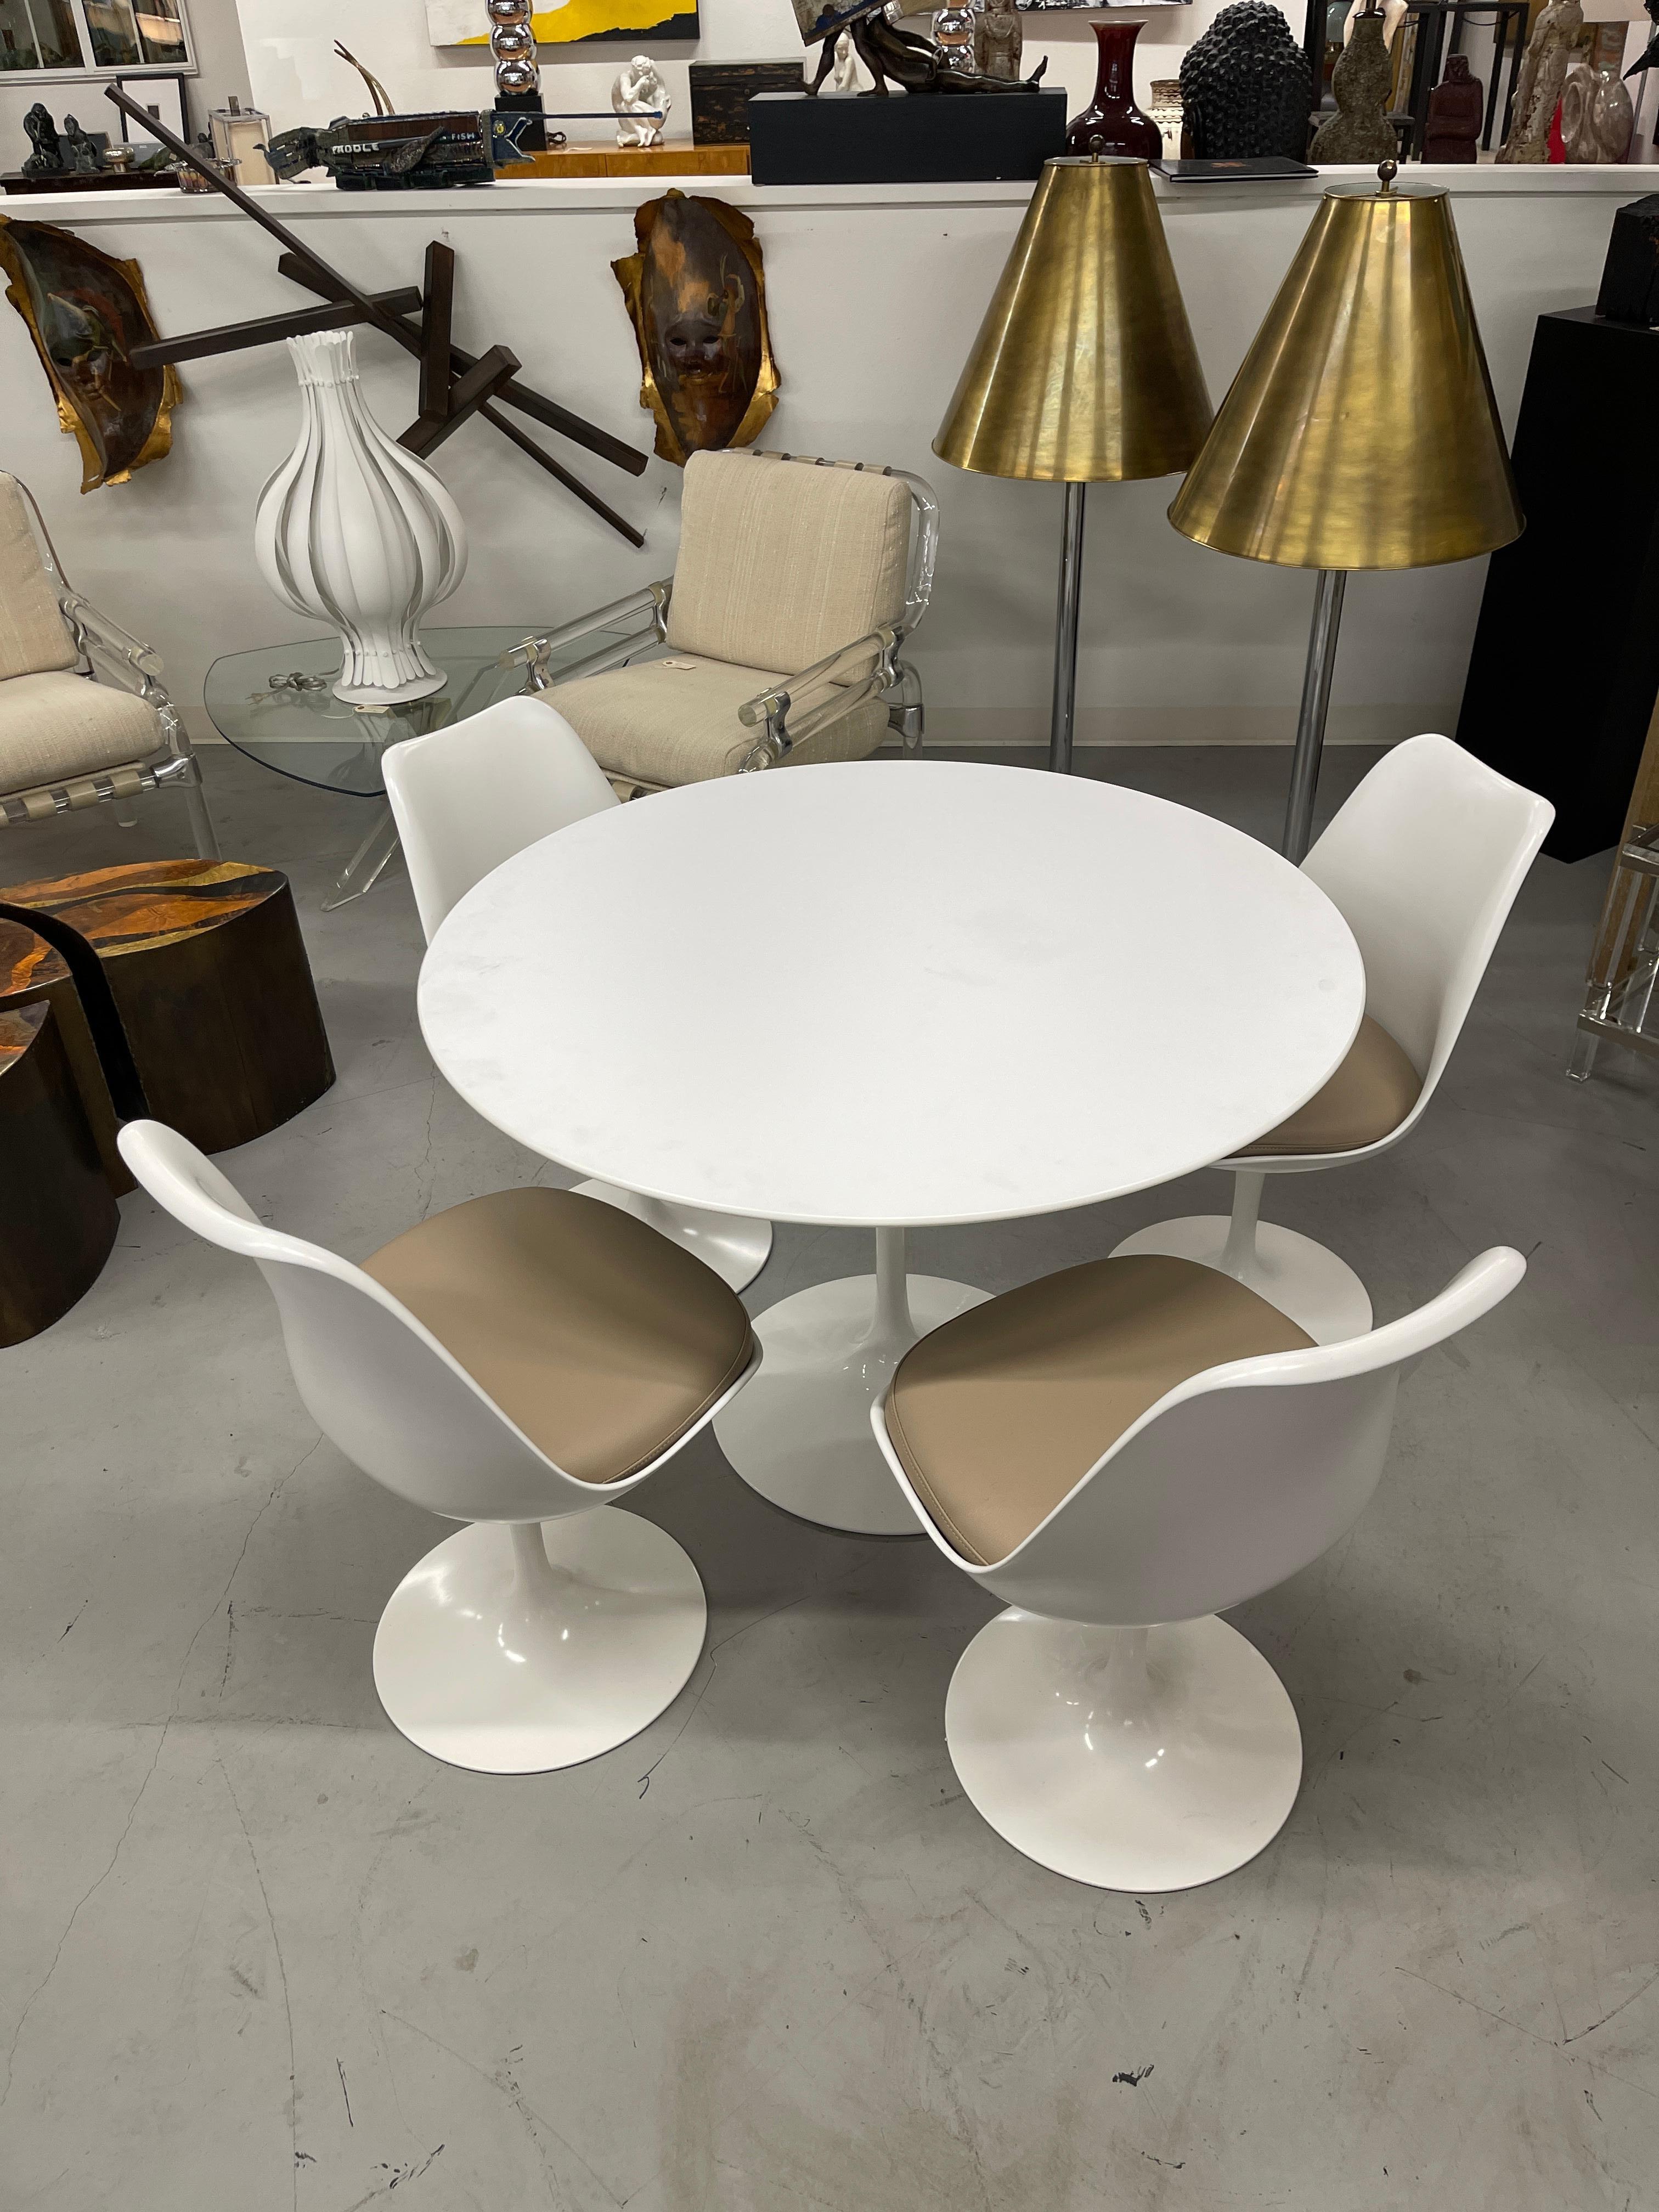 Eero Saarinen for Knoll Pedestal Tulip table with four chairs. The chairs have leather cushions and Knoll tags dated 2015. The set has seen very little use and is in good condition. The table bears the Knoll tag as well. Table is 42 inches in